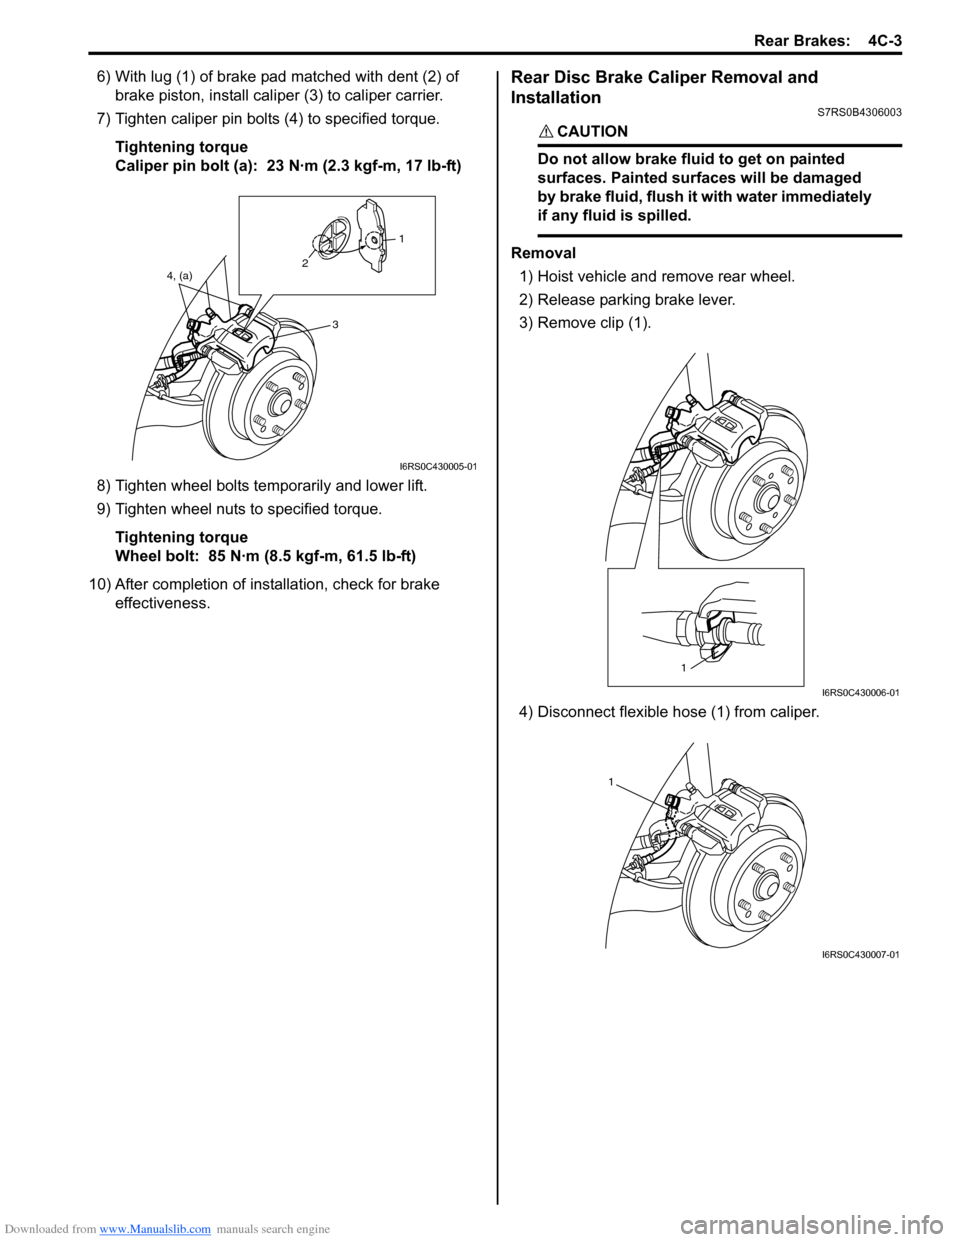 SUZUKI SWIFT 2008 2.G Service User Guide Downloaded from www.Manualslib.com manuals search engine Rear Brakes:  4C-3
6) With lug (1) of brake pad matched with dent (2) of brake piston, install caliper  (3) to caliper carrier.
7) Tighten cali